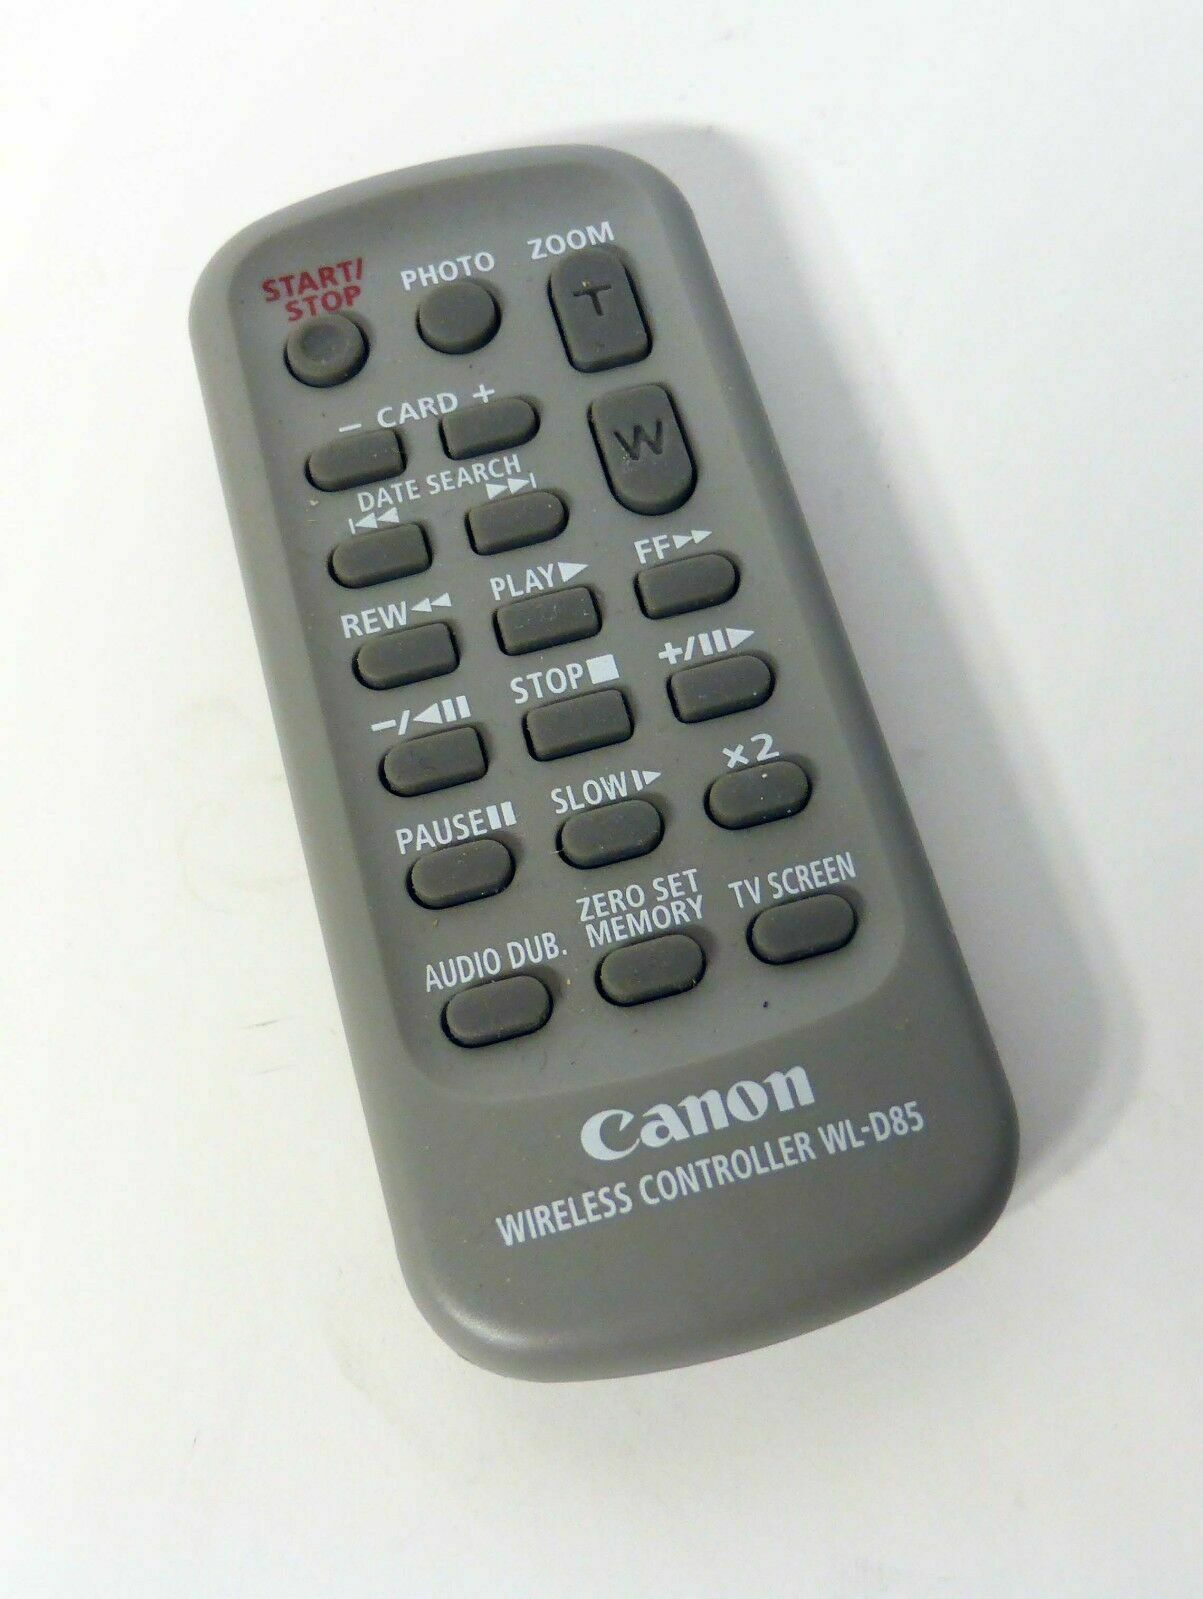 Primary image for Canon wireless remote control ler WL D85 DC20 DC230 HG10 DC40 DC220 camcorder